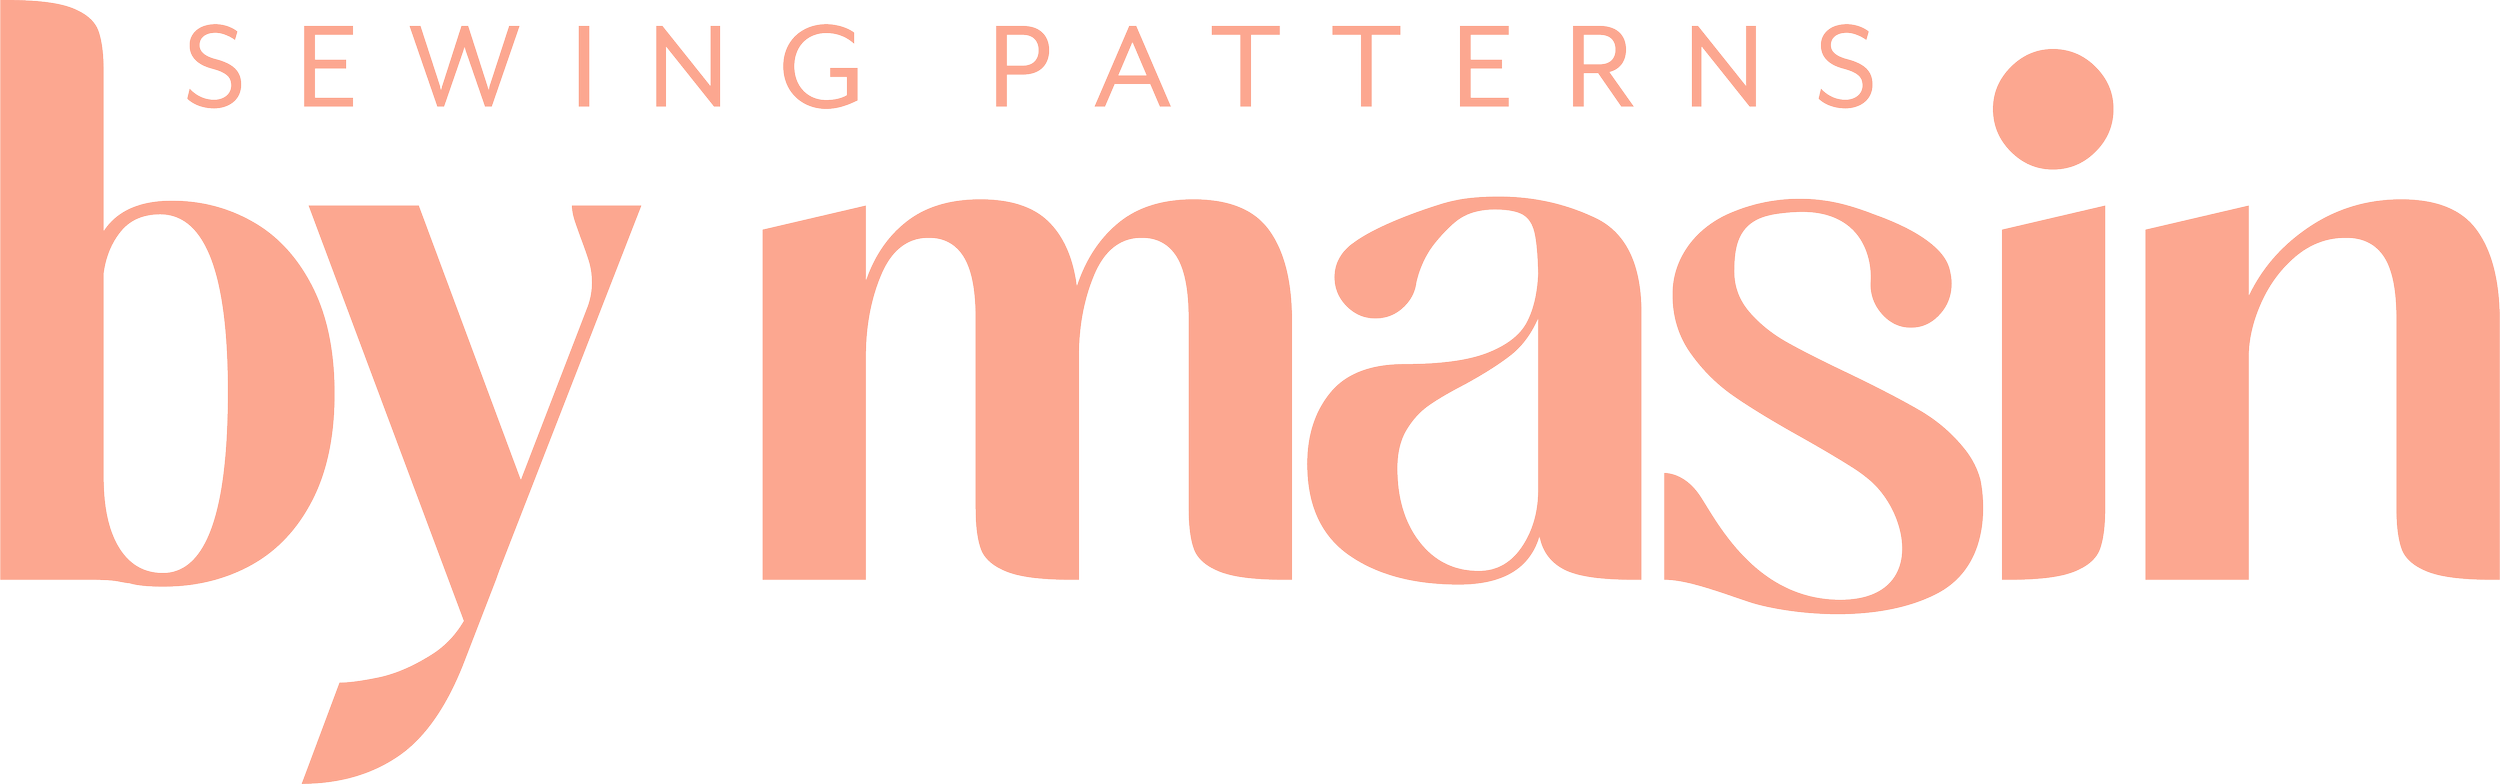 Sewing Patterns by Masin